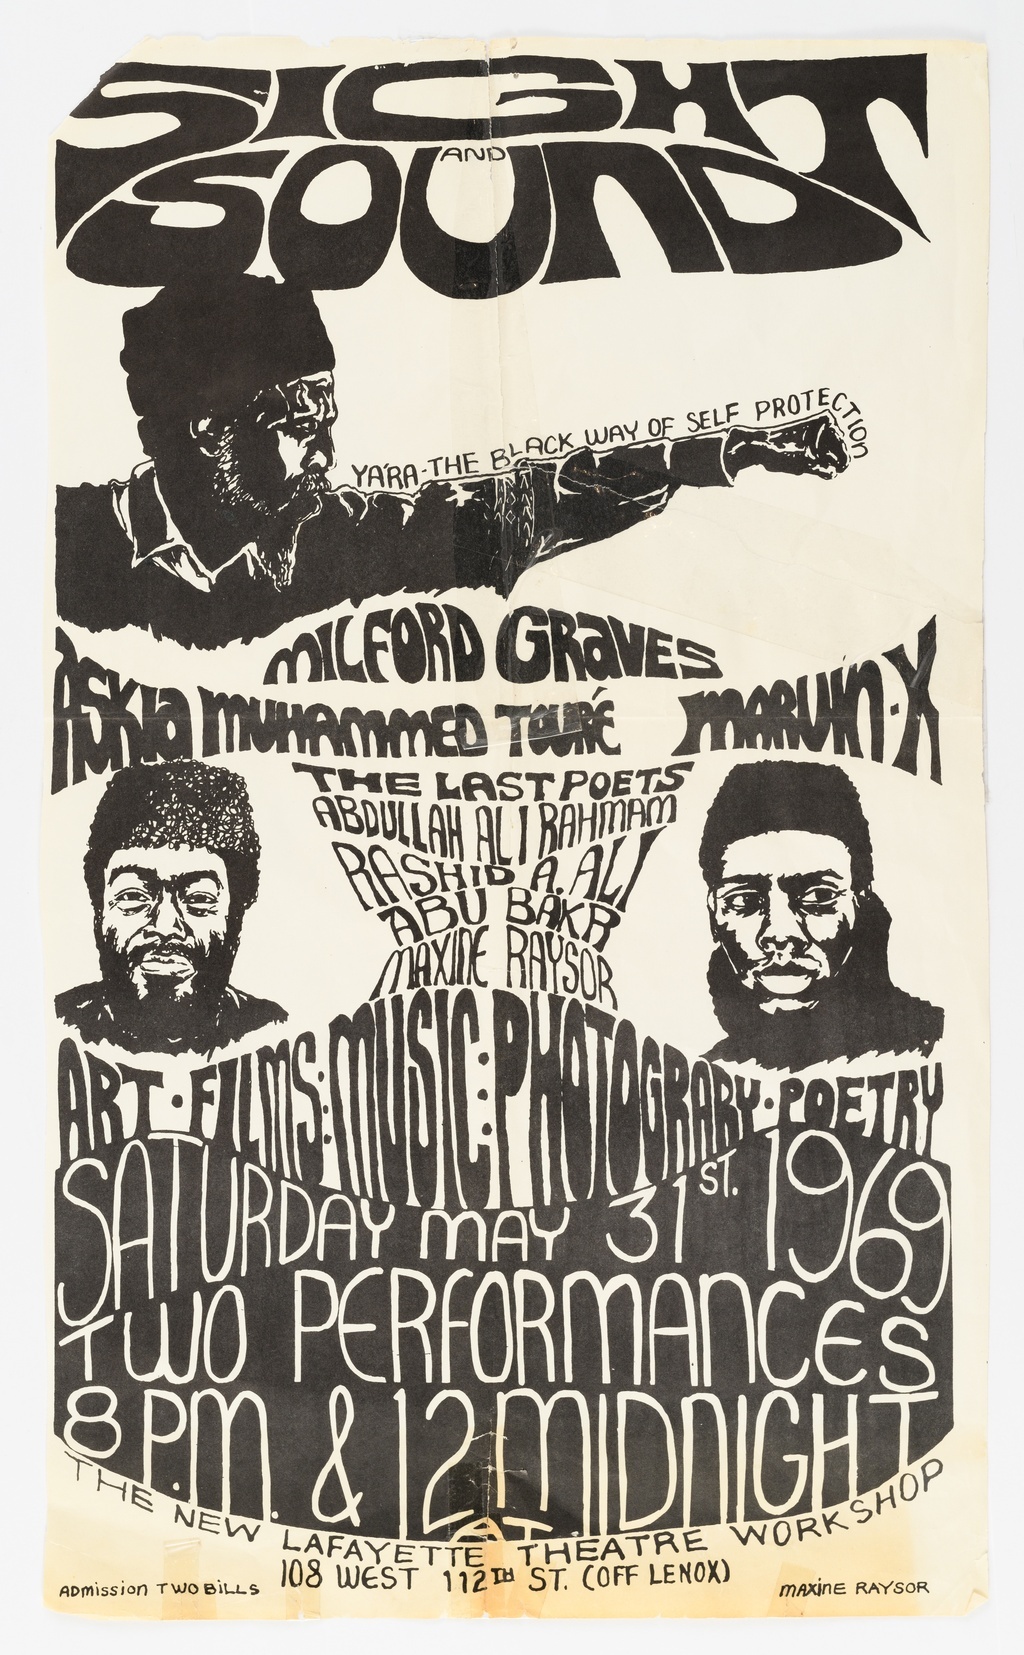 Black and white poster for Sight and Sound. At the top of the poster is an illustrated image of a male figure holding his arm out, his hand in a fist. Text that reads: "Yara - The Black Way of Self Protection" follows his extended arm. Two illustrated images of male figures flank text at the center of the poster.